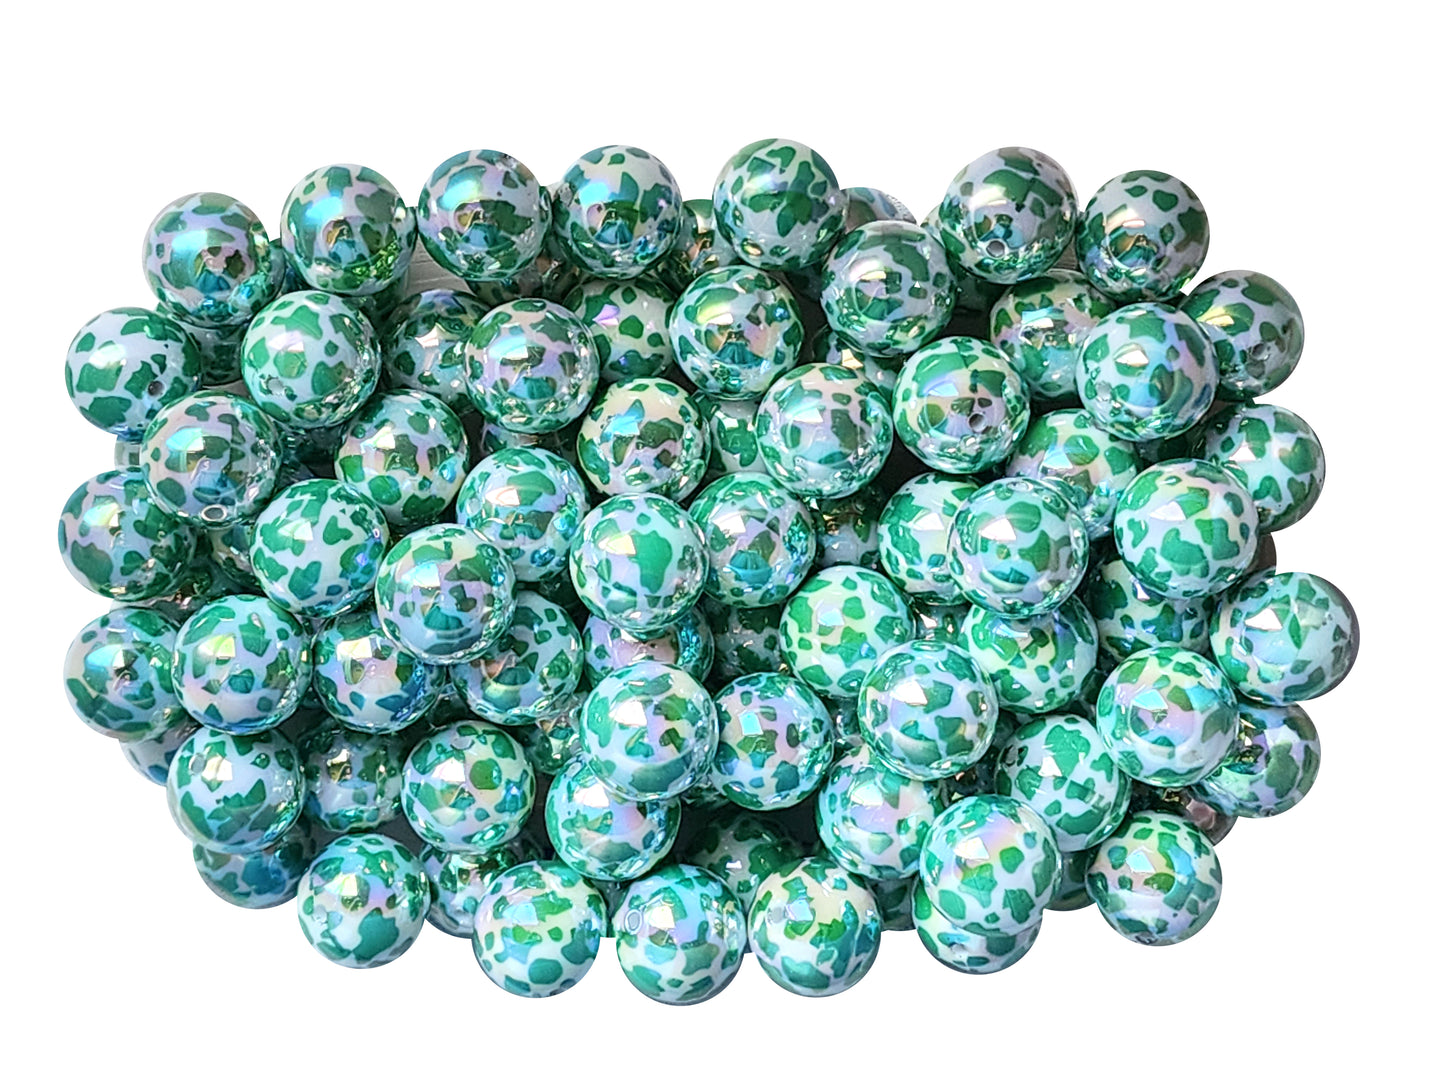 teal cow AB 20mm printed wholesale bubblegum beads